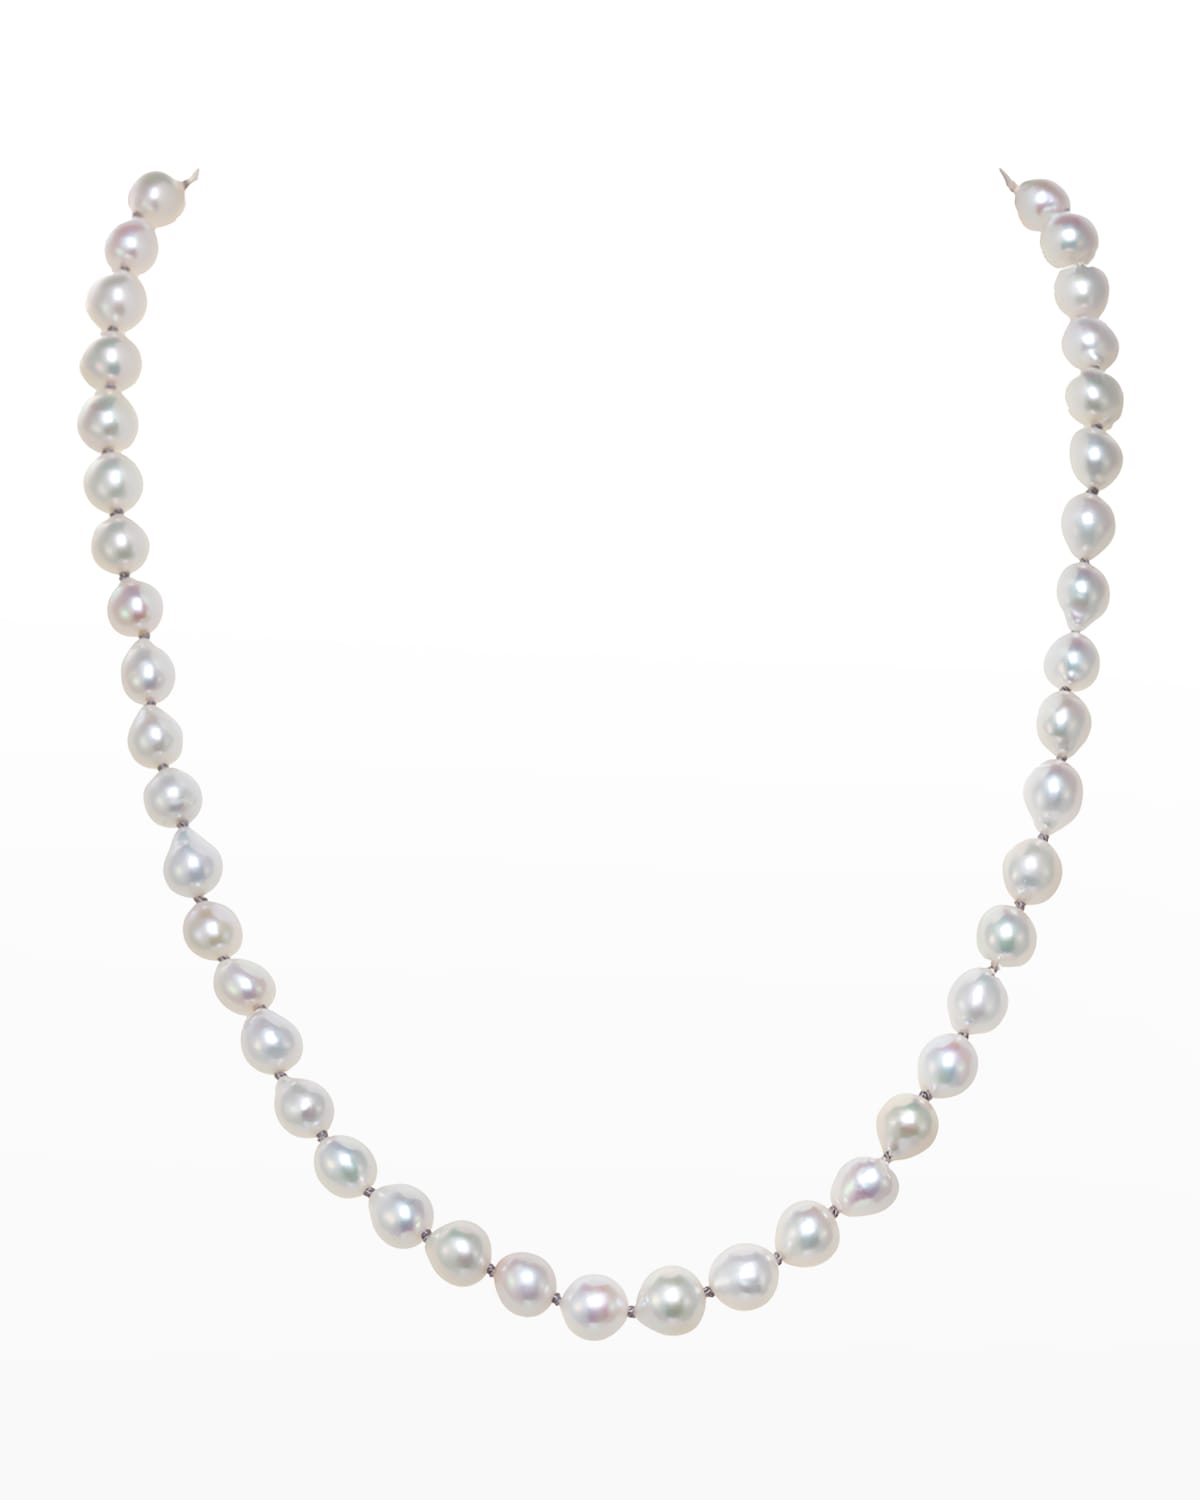 A new 14k gold filled 16" with 10mm  crystal round pearl necklace!